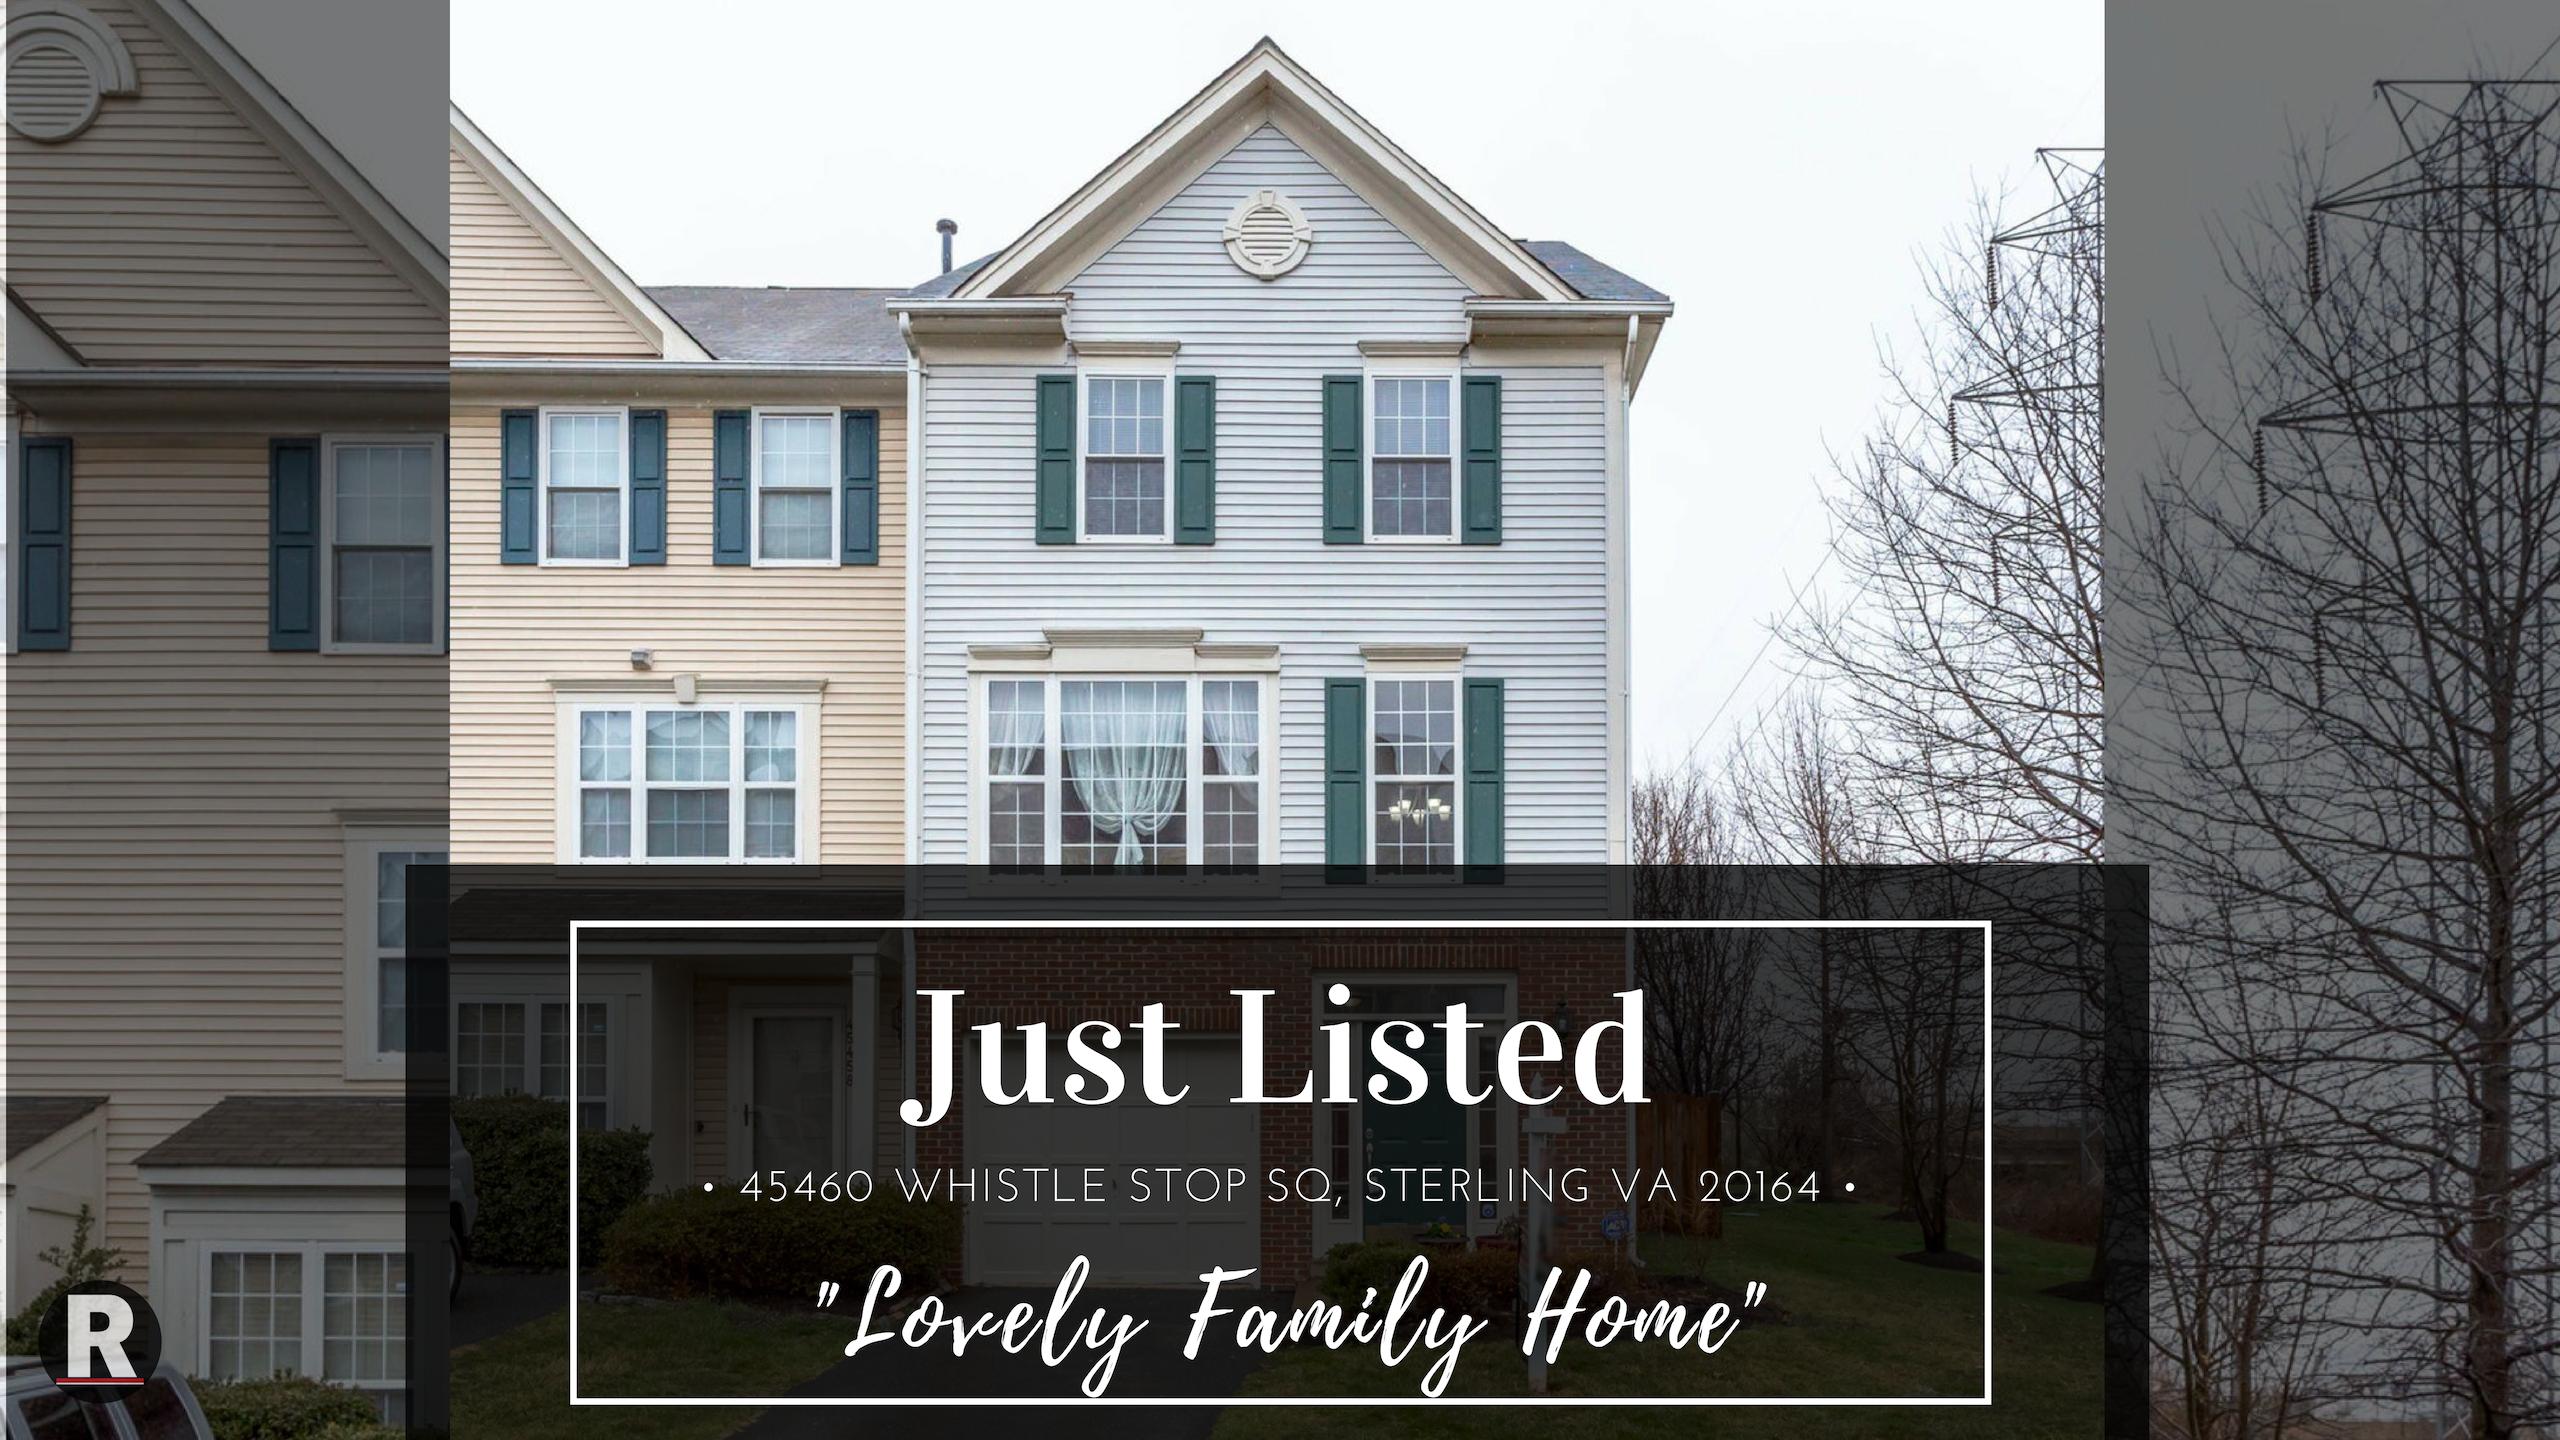 Just Listed! 45460 Whistle Stop Sq, Sterling VA 20164